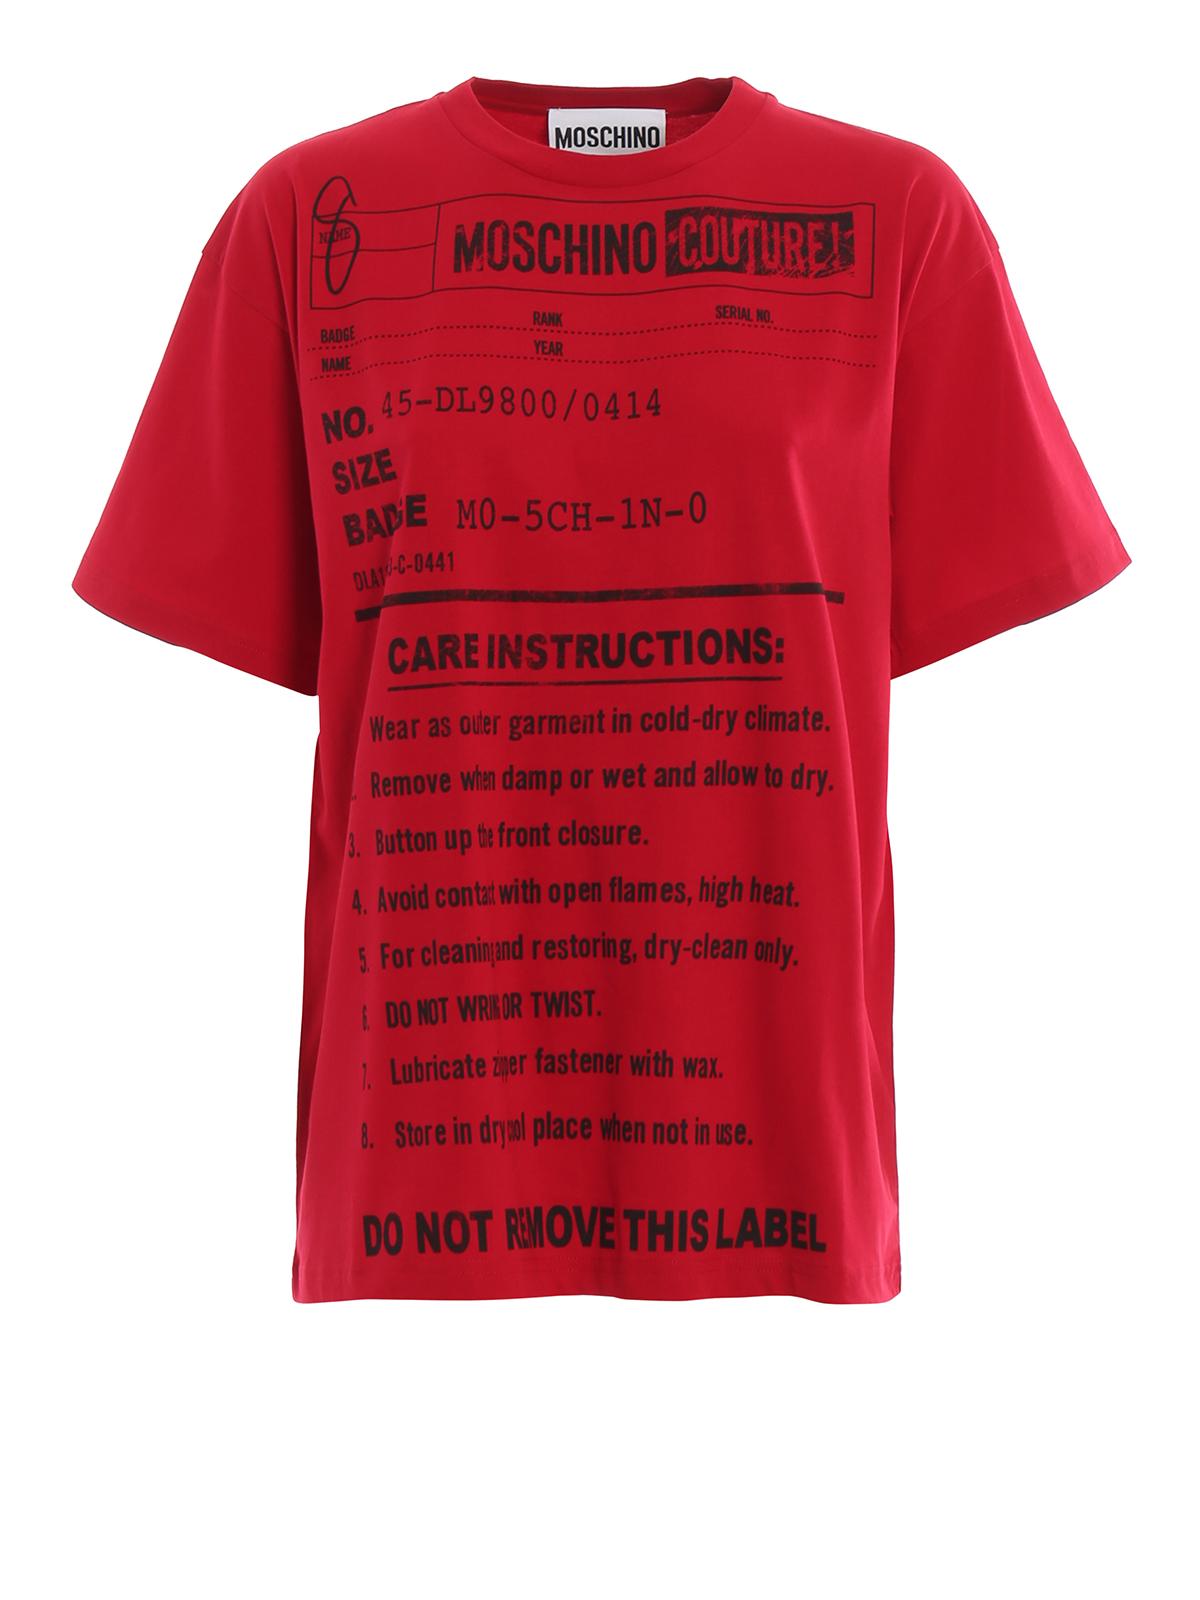 Moschino Army Label Oversize Cotton Tee in Dark Red (Red) for Men - Lyst